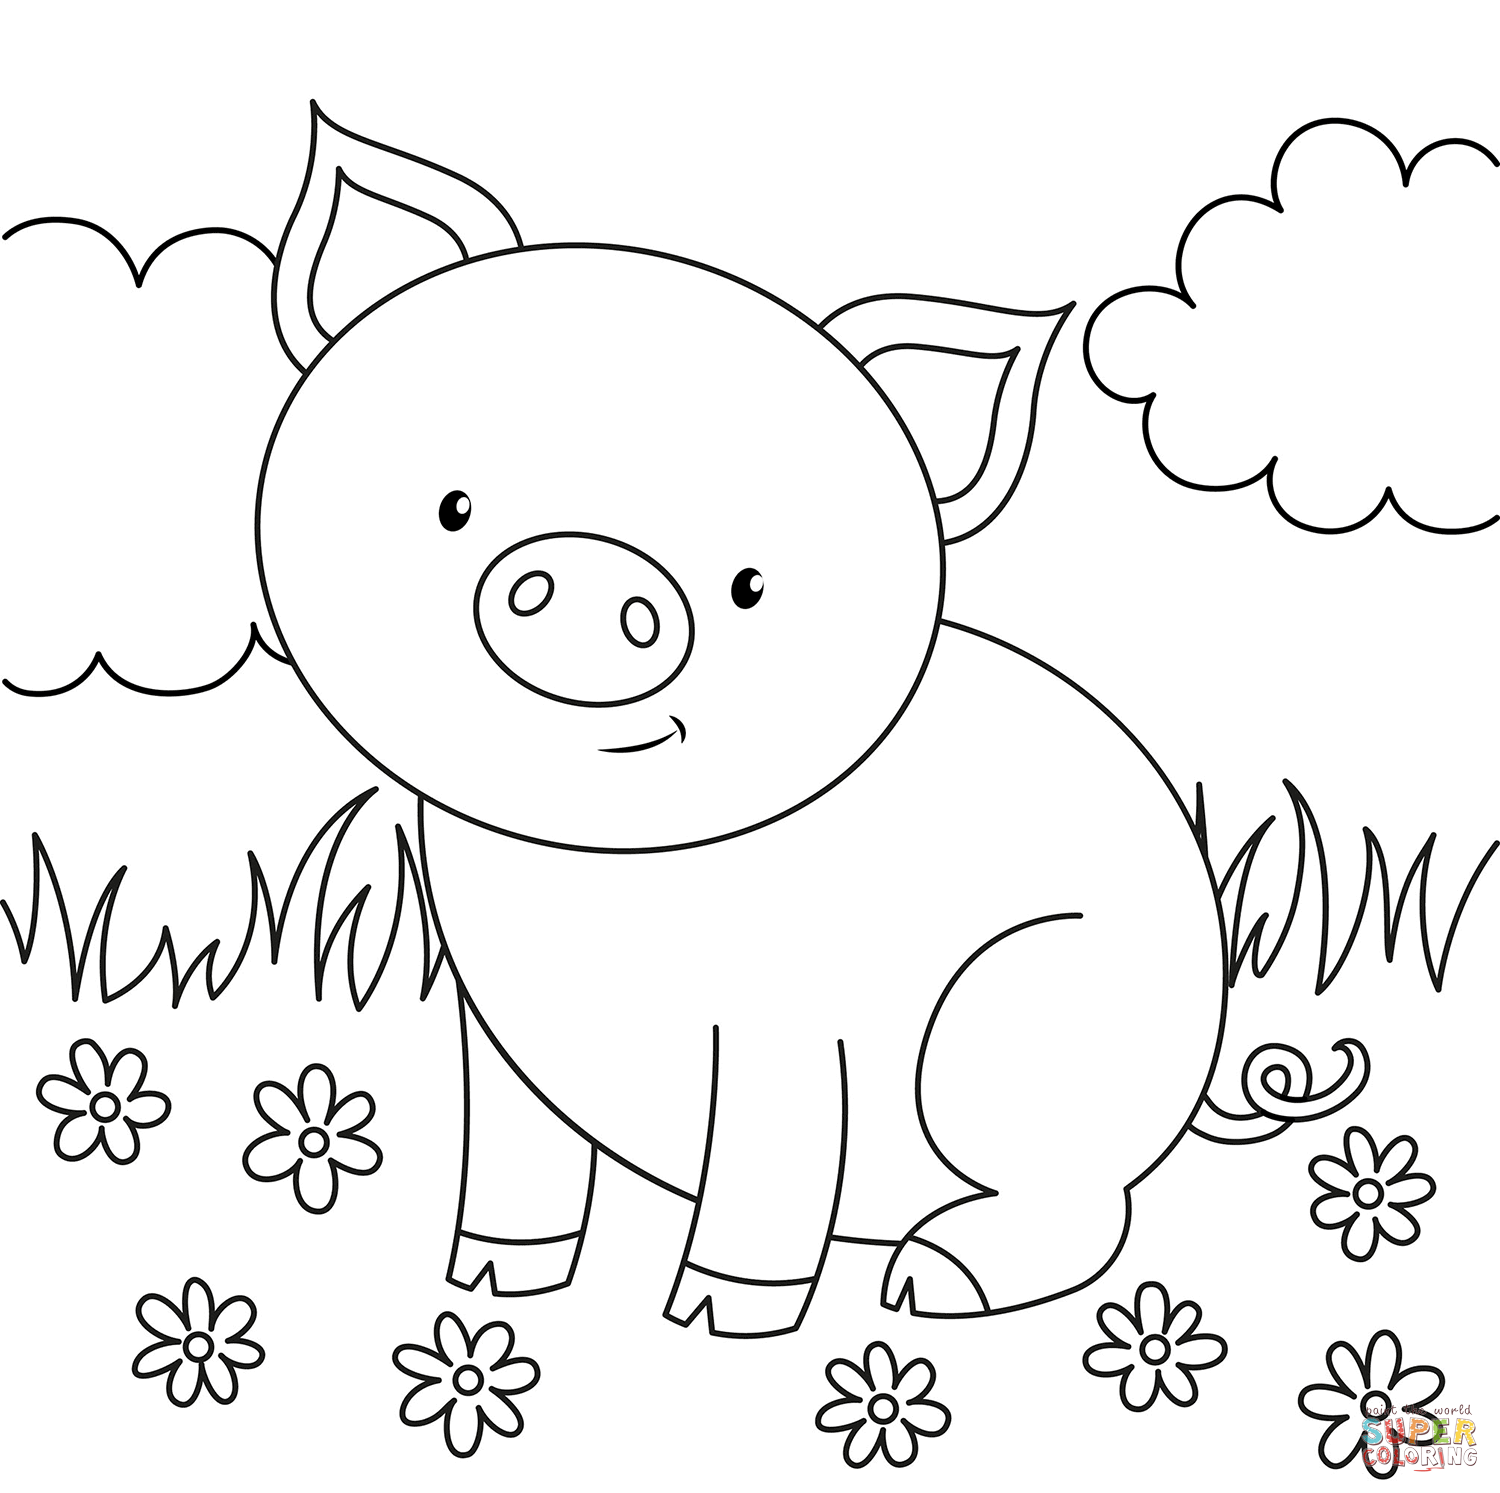 Cute pig coloring page free printable coloring pages